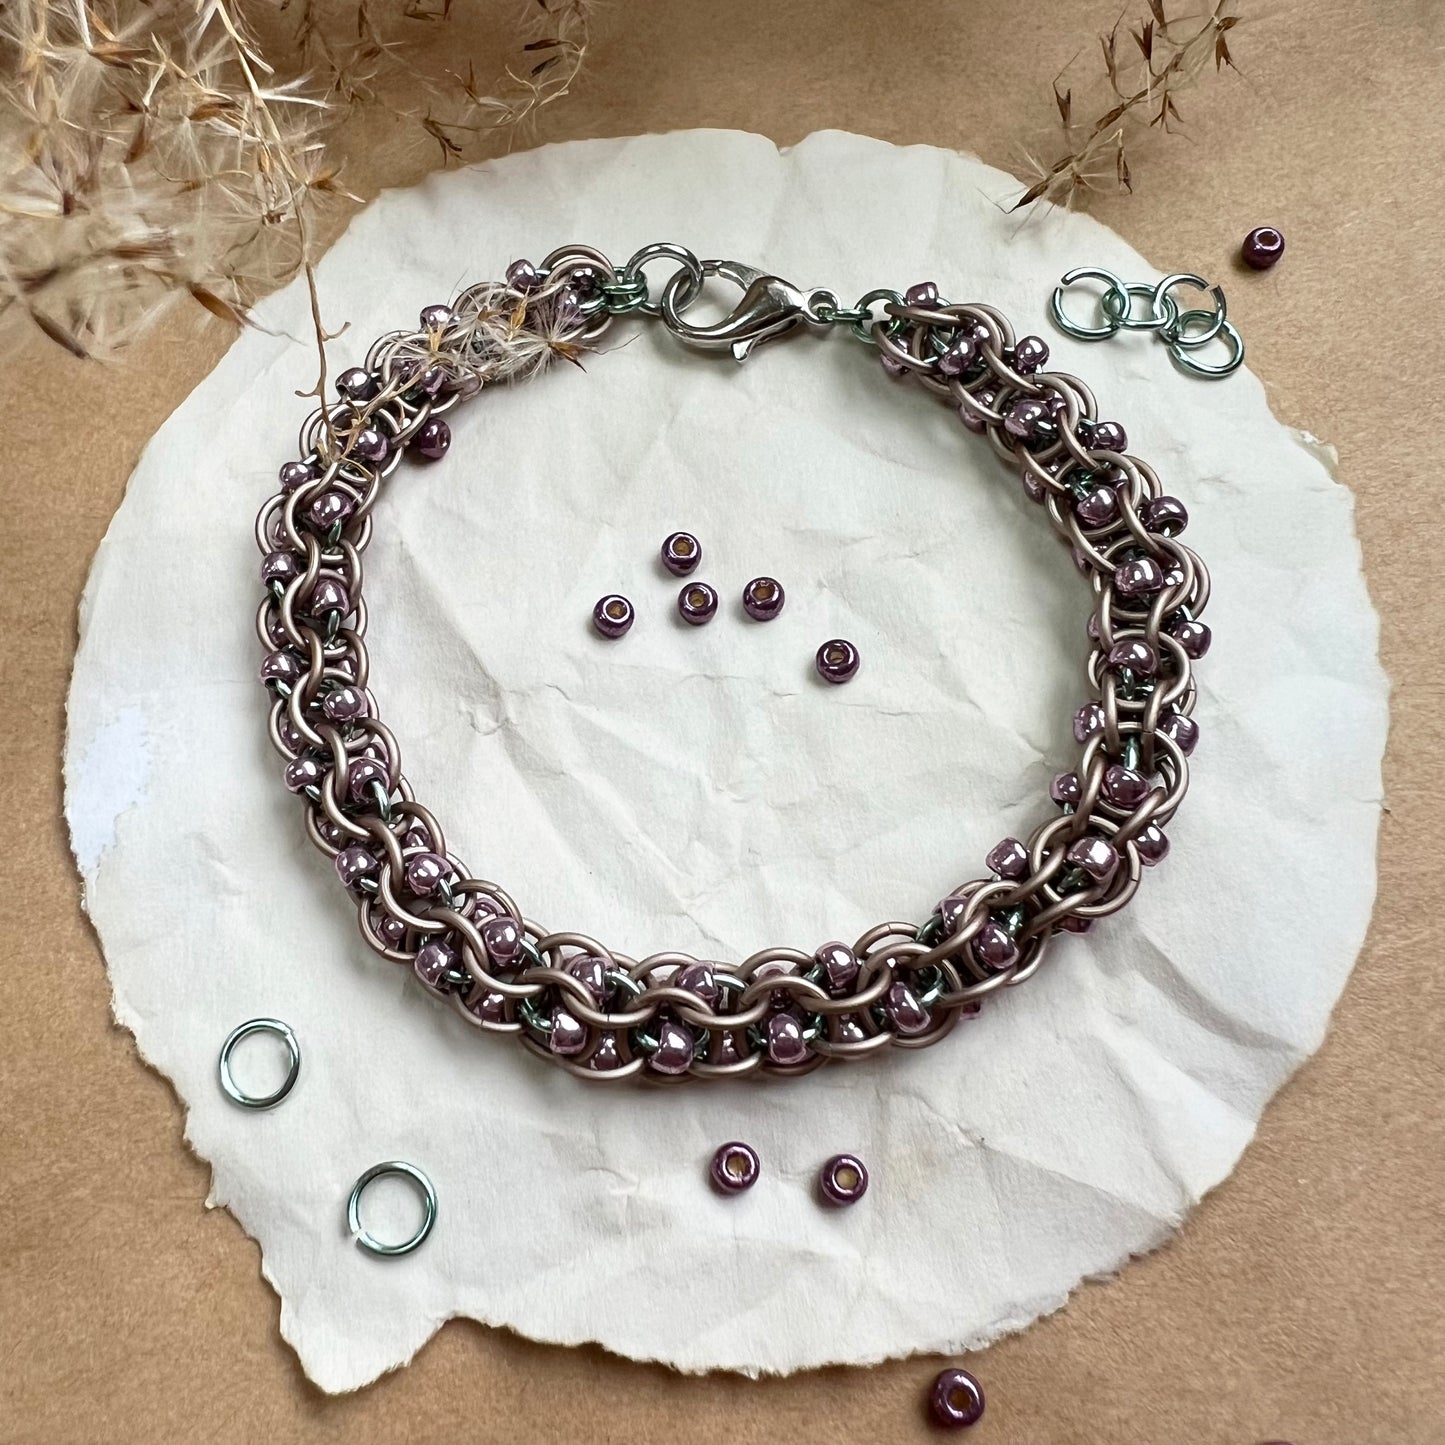 Captive 2 in 1 Beaded Chain Kit and Video Class Matte Champagne Sea Foam and Pale Lilac